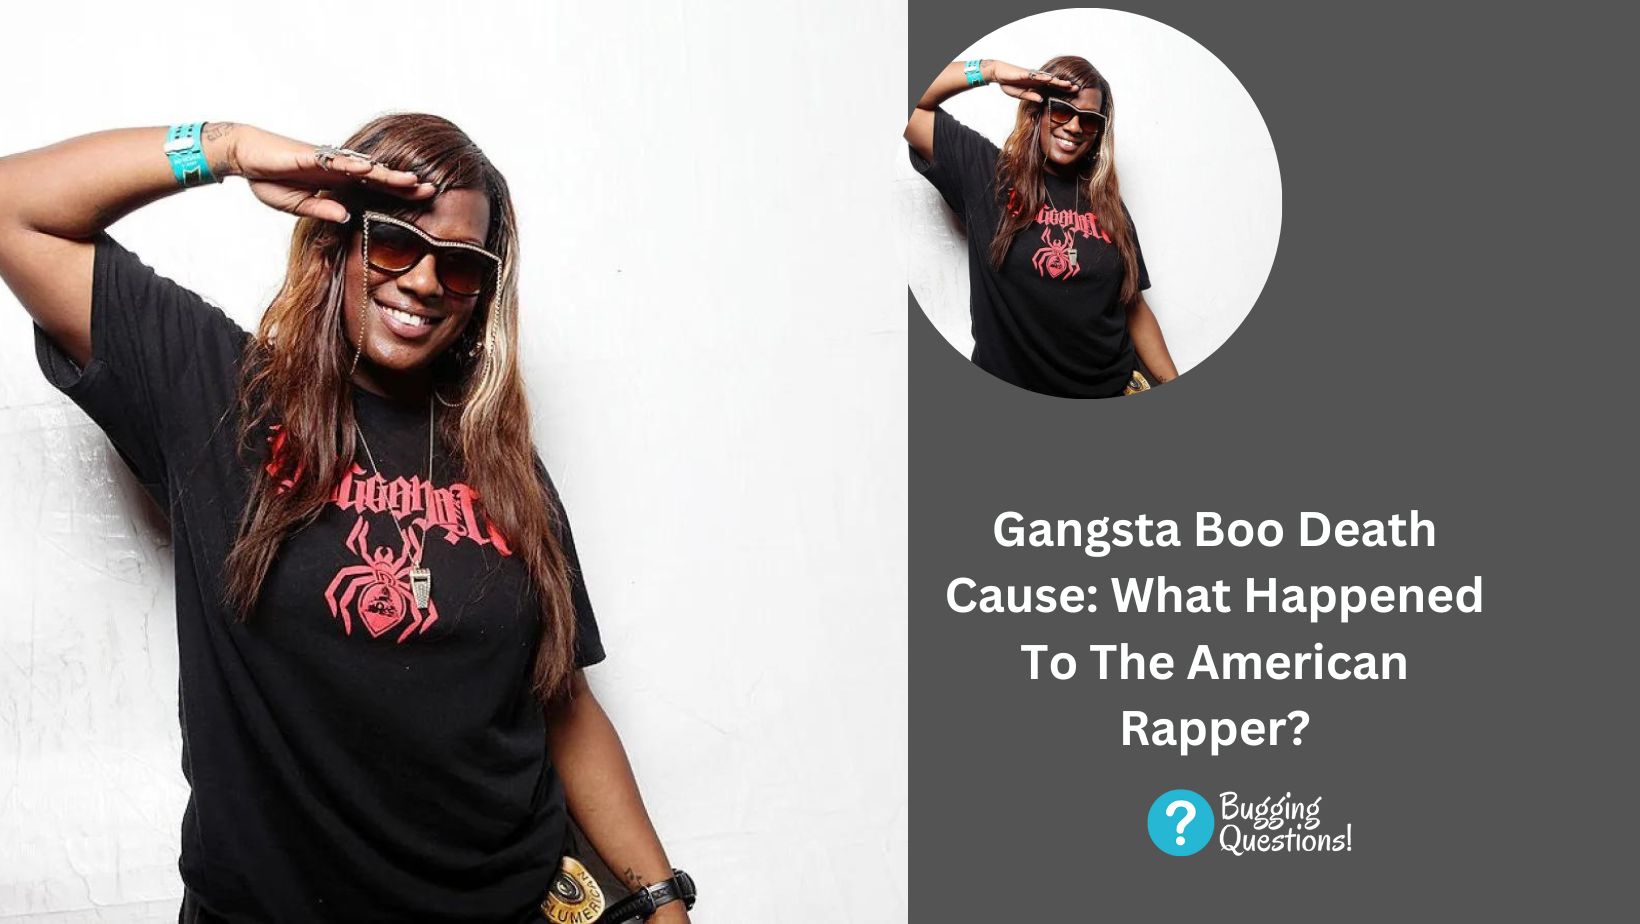 Gangsta Boo Death Cause: What Happened To The American Rapper?